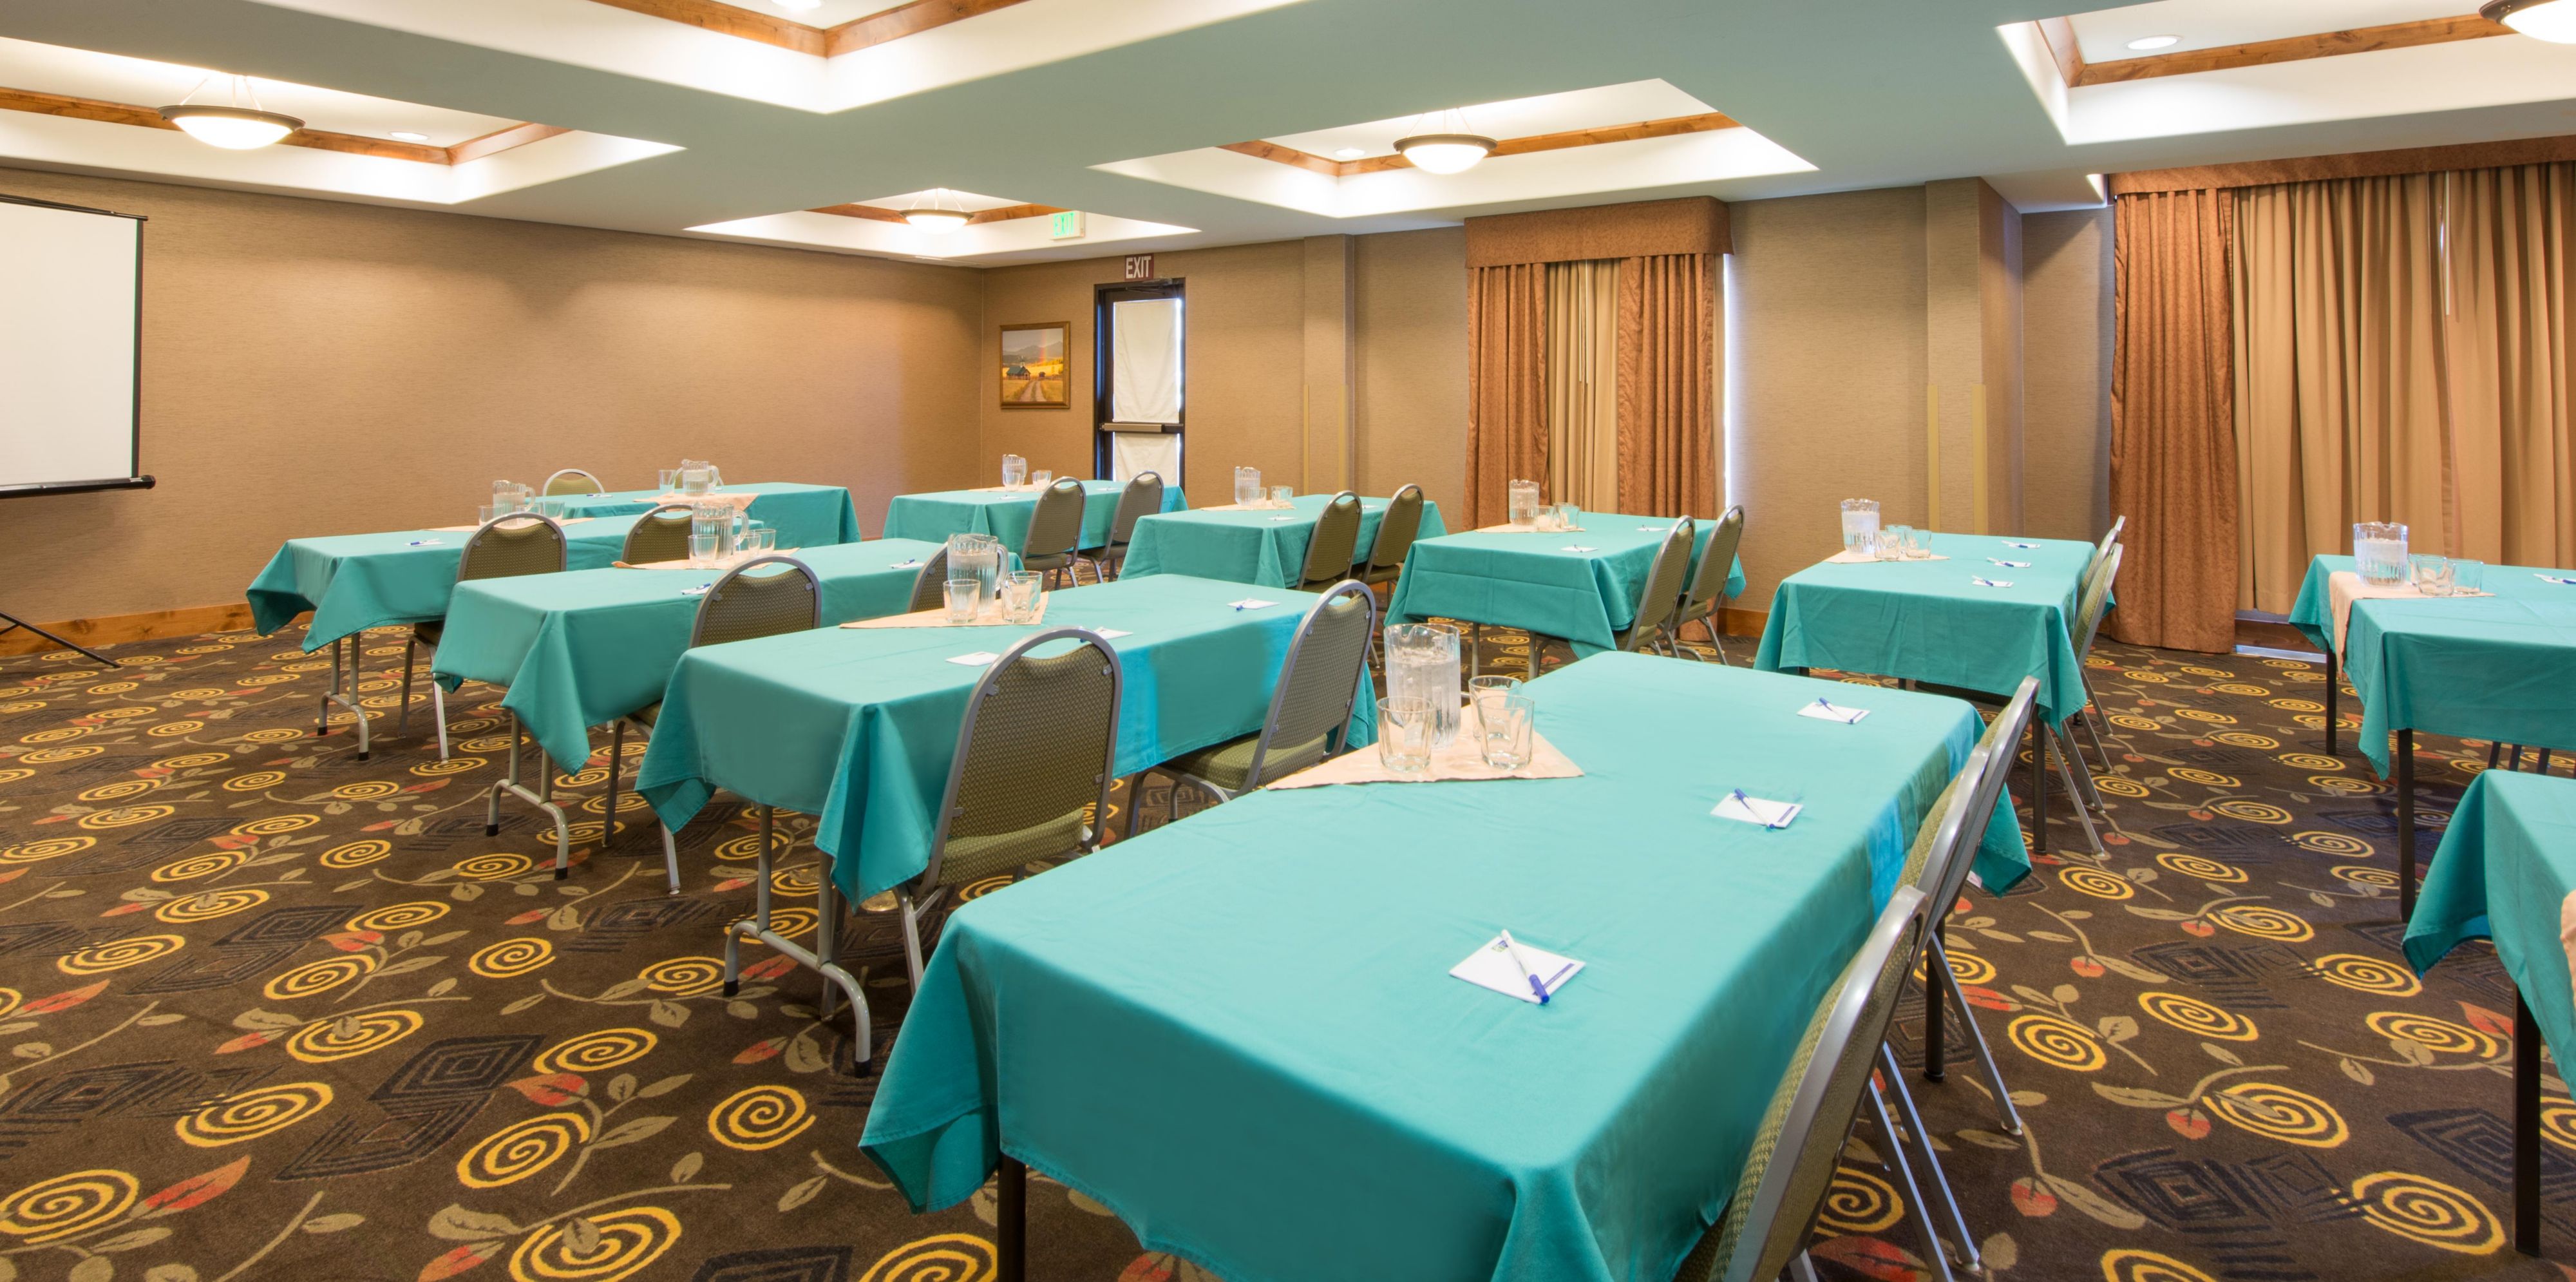 We have two great rooms to provide meeting spaces.  One is a larger room, can equip up to 45 people and other space is a smaller board room, with a large table and fits 10 chairs around. 